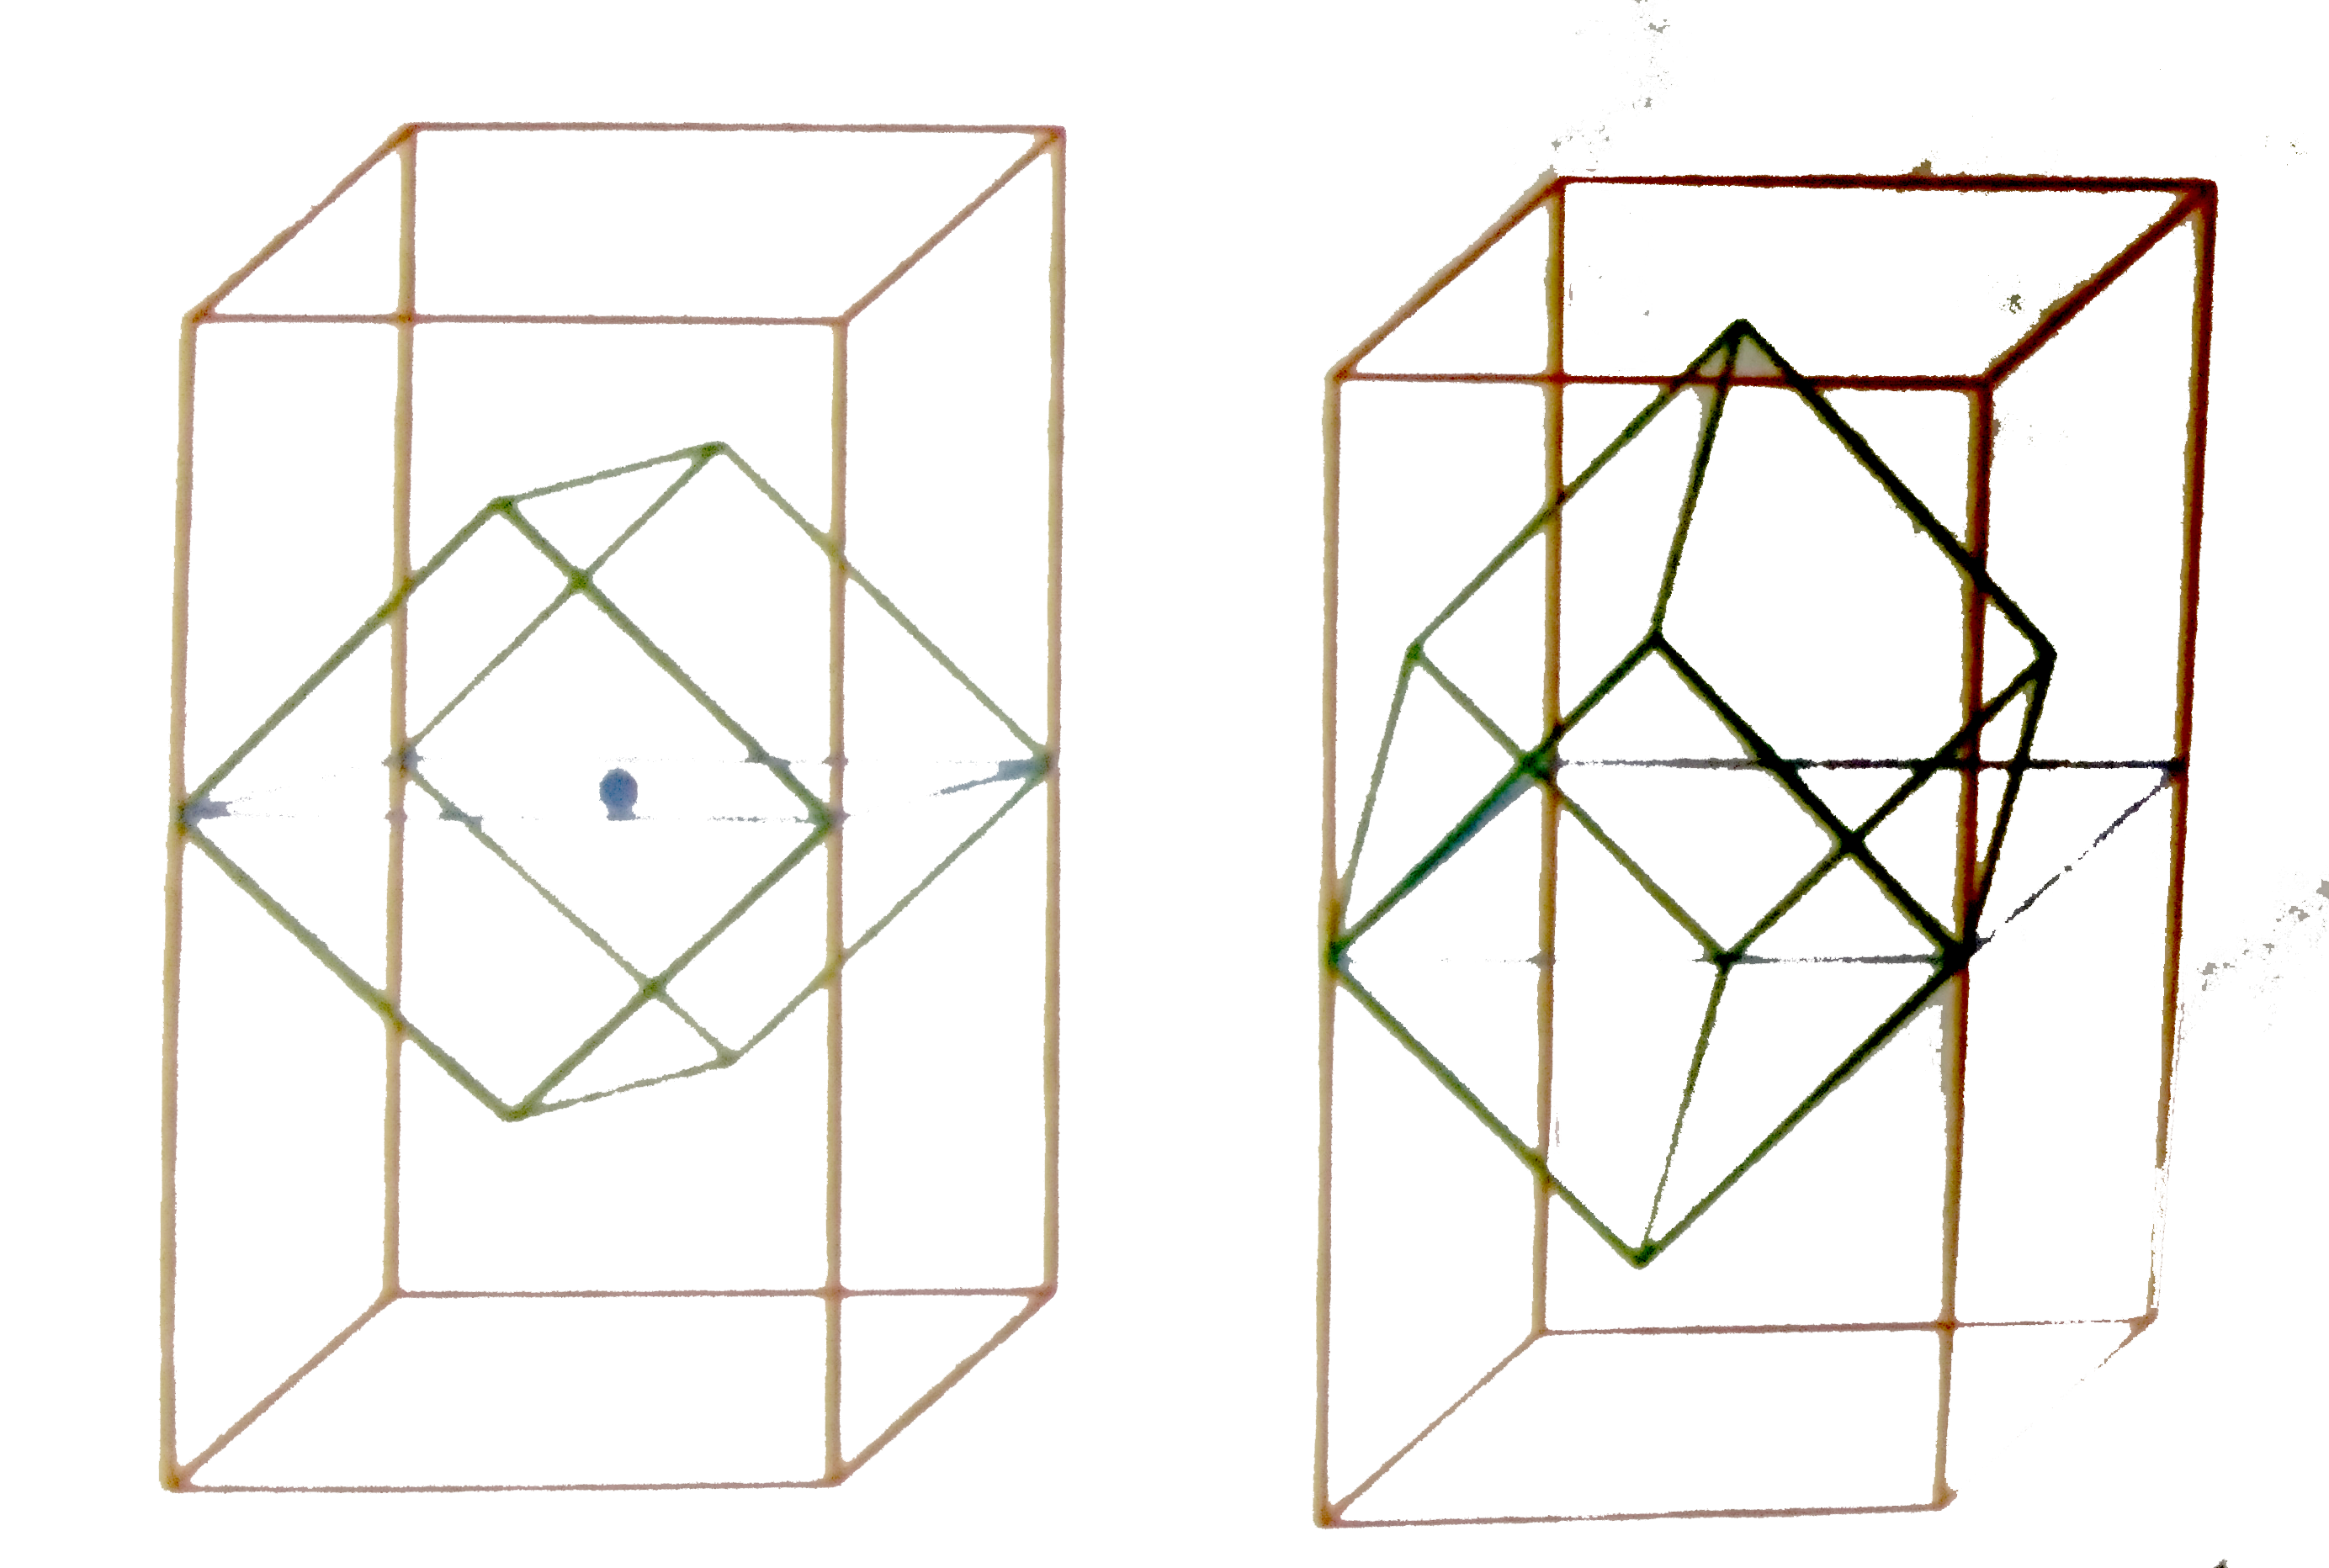 Face centered cubic lattice of NaCl may also smaller, tetragonal unit cell as shown below fig. (a,b)      The volume of the smaller unit cell in fig(a) , if the volume normal unit cell is V, is